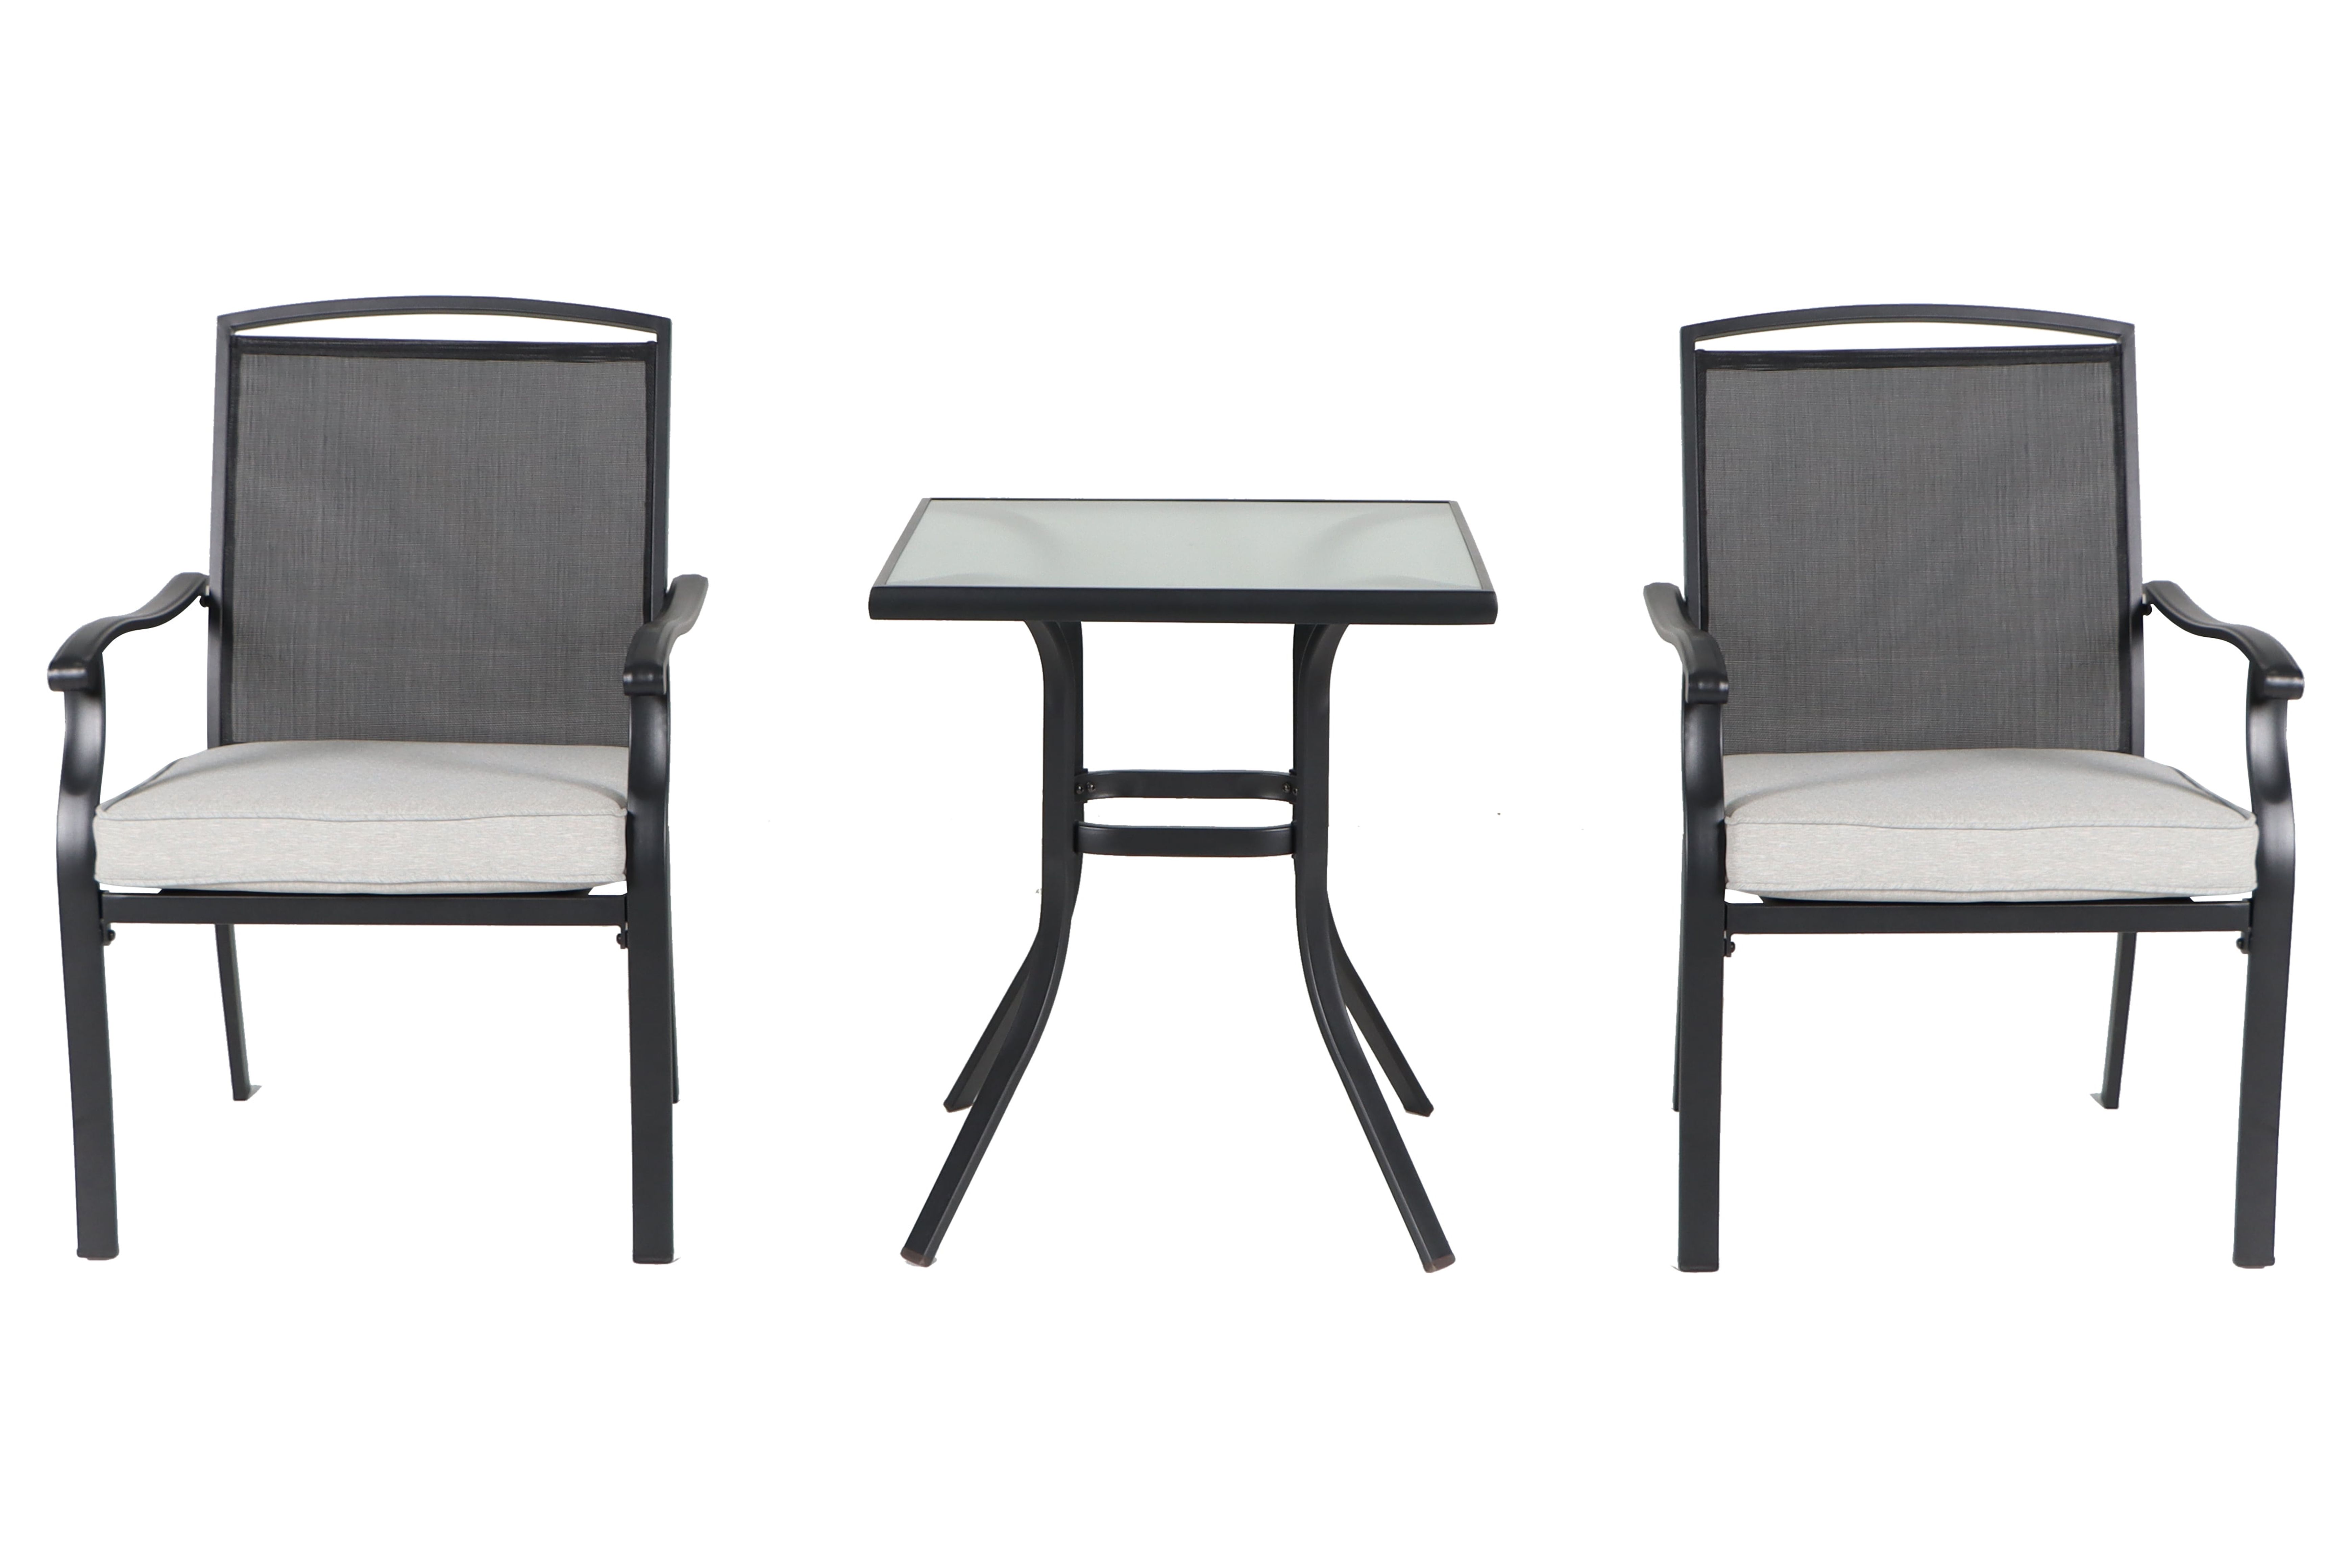 Mainstays Alexandra Square 3-Piece Steel Outdoor Furniture Patio Bistro Set with Polyester cushions, Gray - image 2 of 6